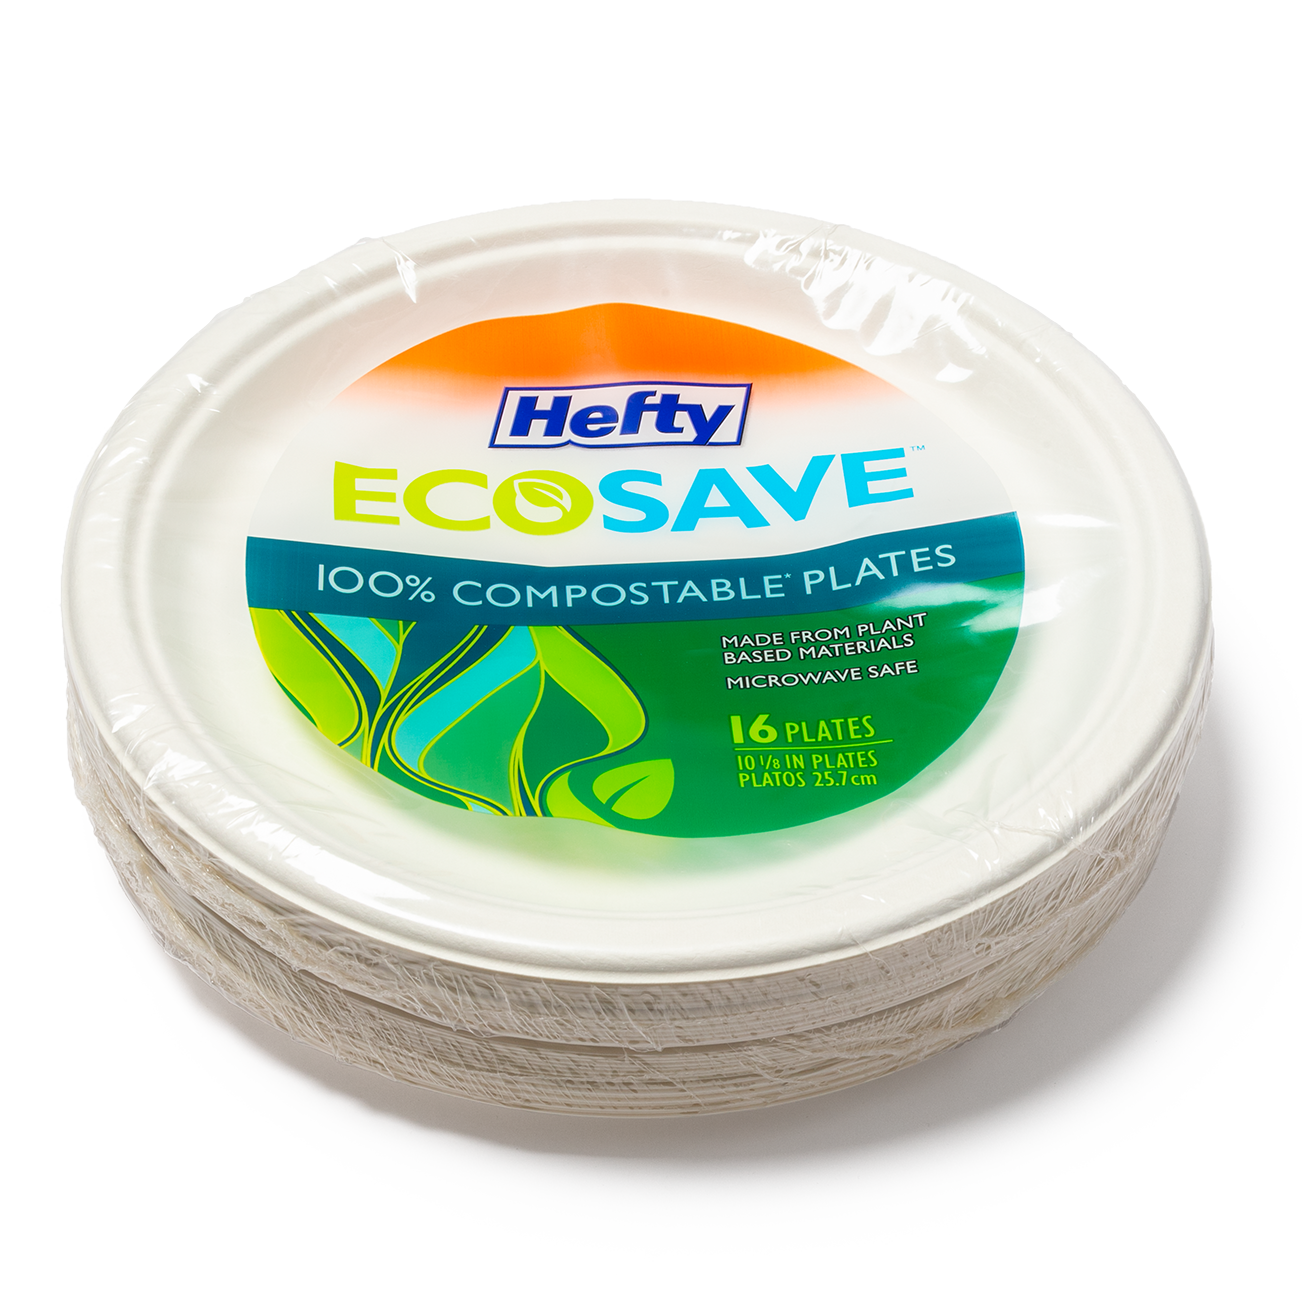 https://res.cloudinary.com/hksqkdlah/image/upload/SIL_Hefty_ECOSAVE-Compostable-10-18-inch-Plates_2_mjdqp2.png